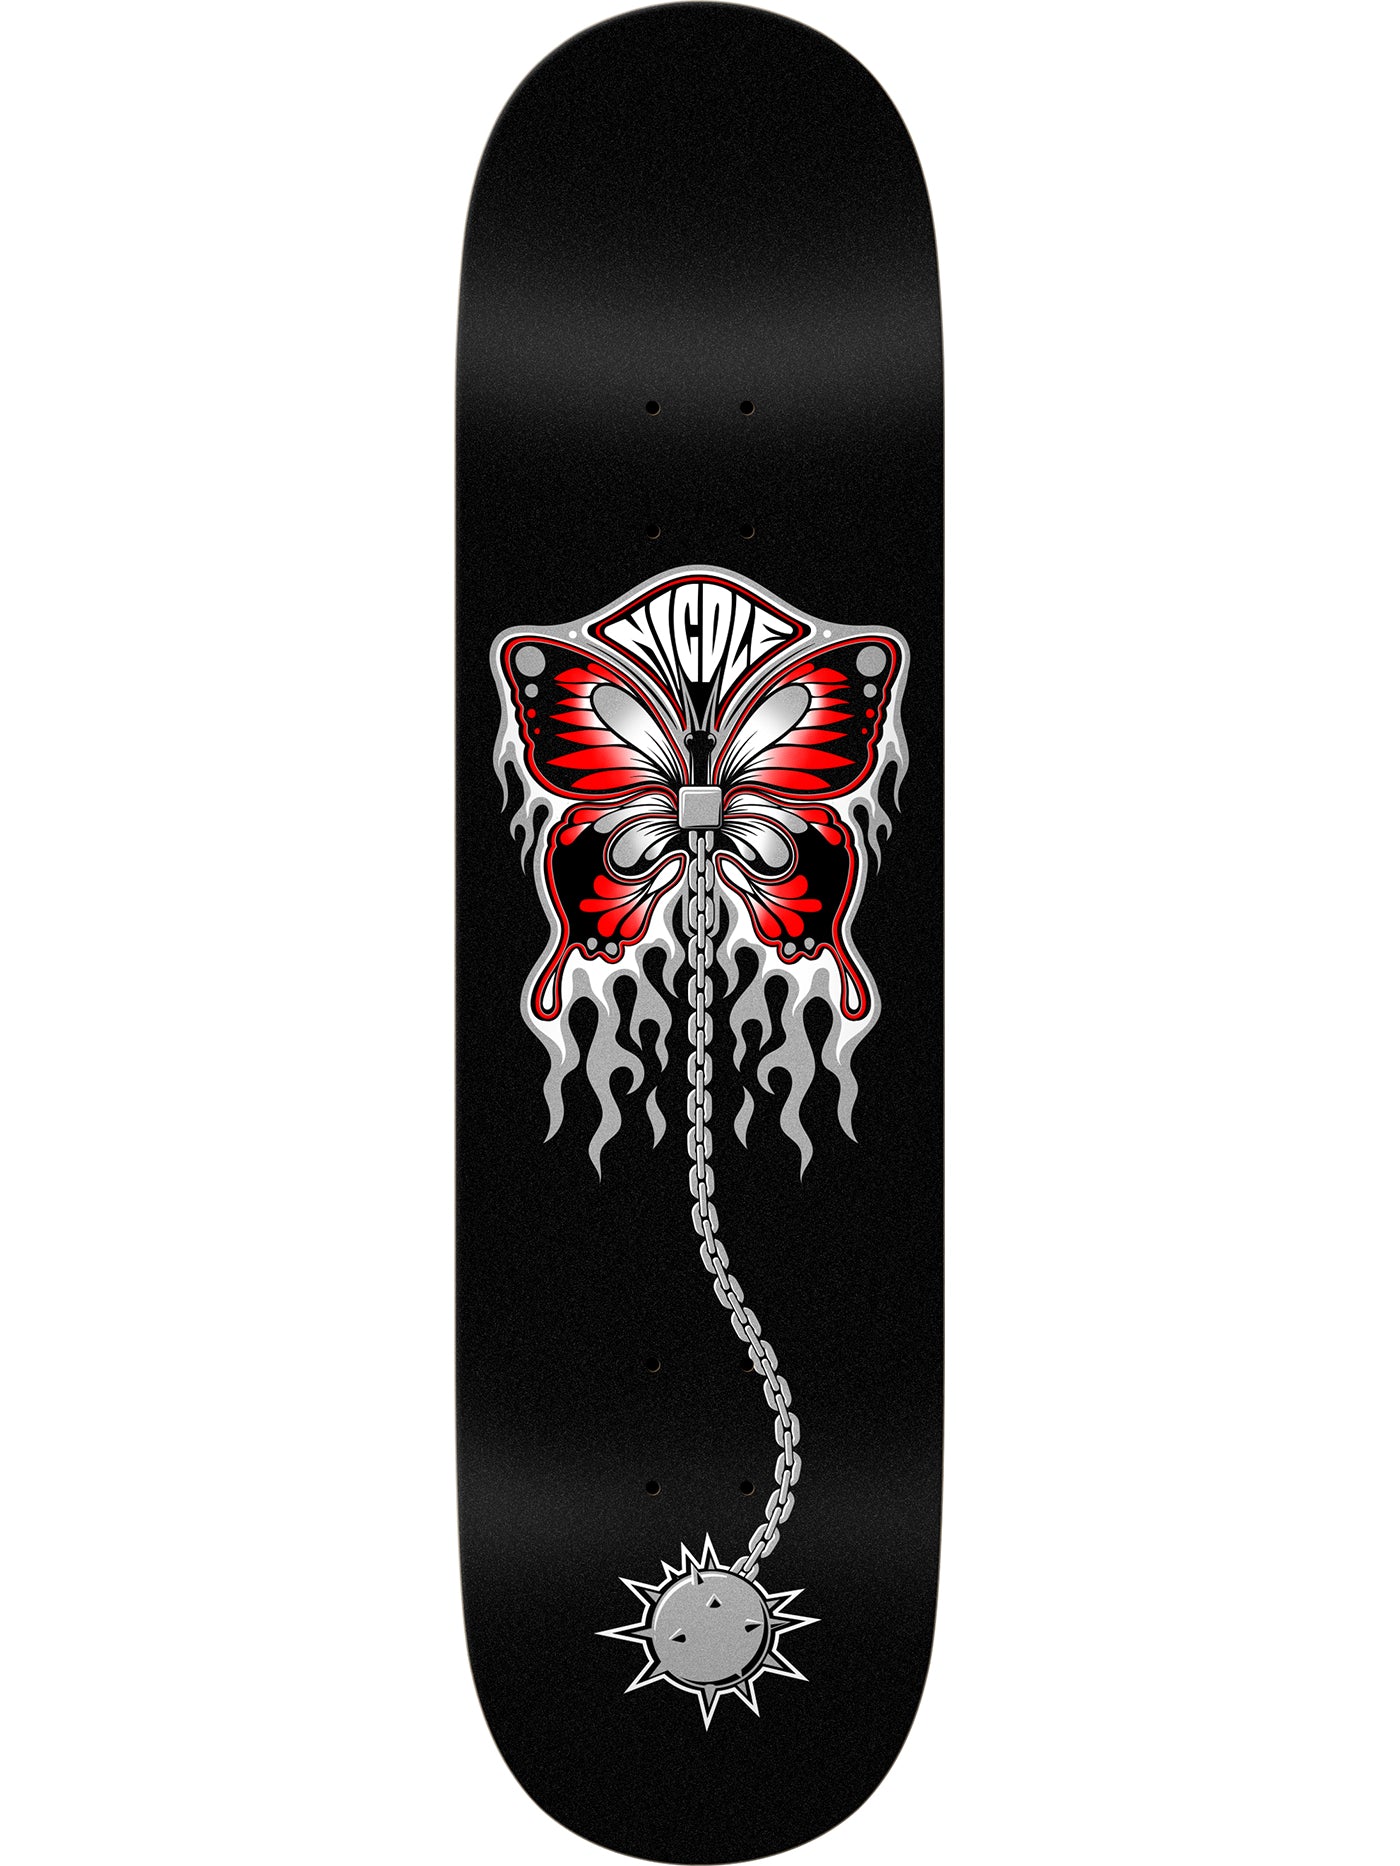 Real Nicole Unchained 8.5 Skateboard Deck